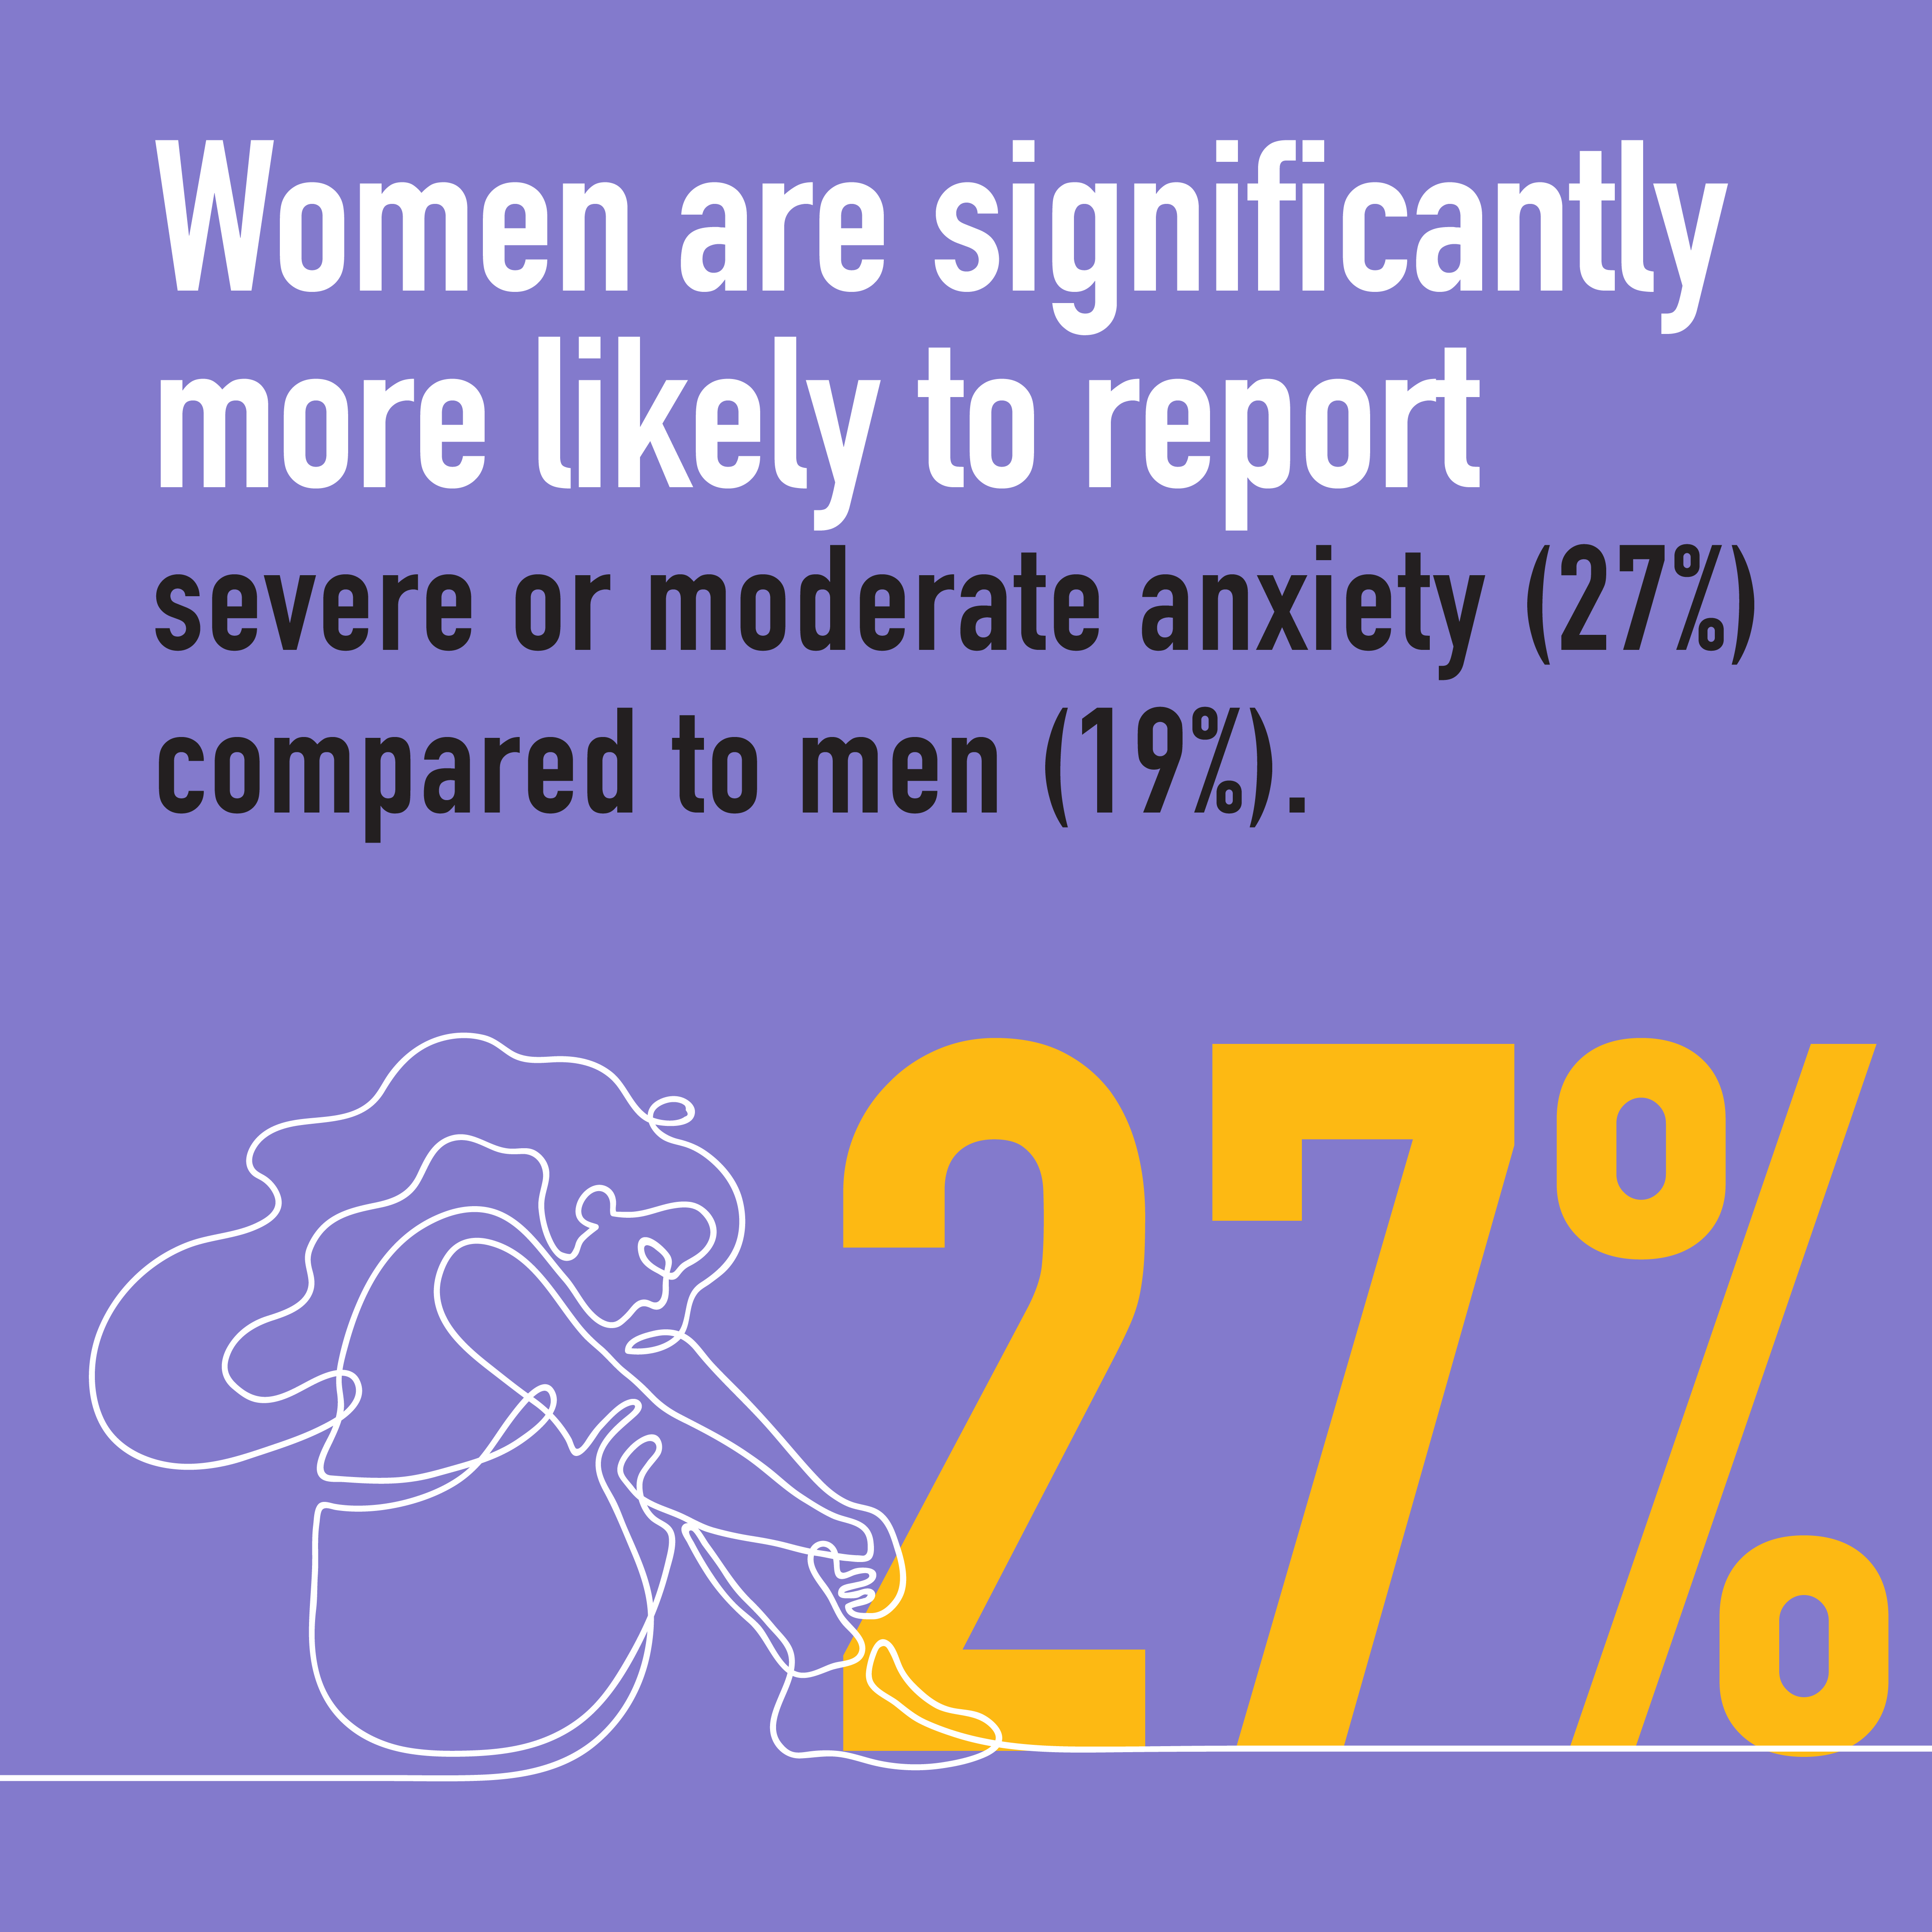 Women are significantly more likely to report severe or moderate anxiety (27%) compared to men (19%)